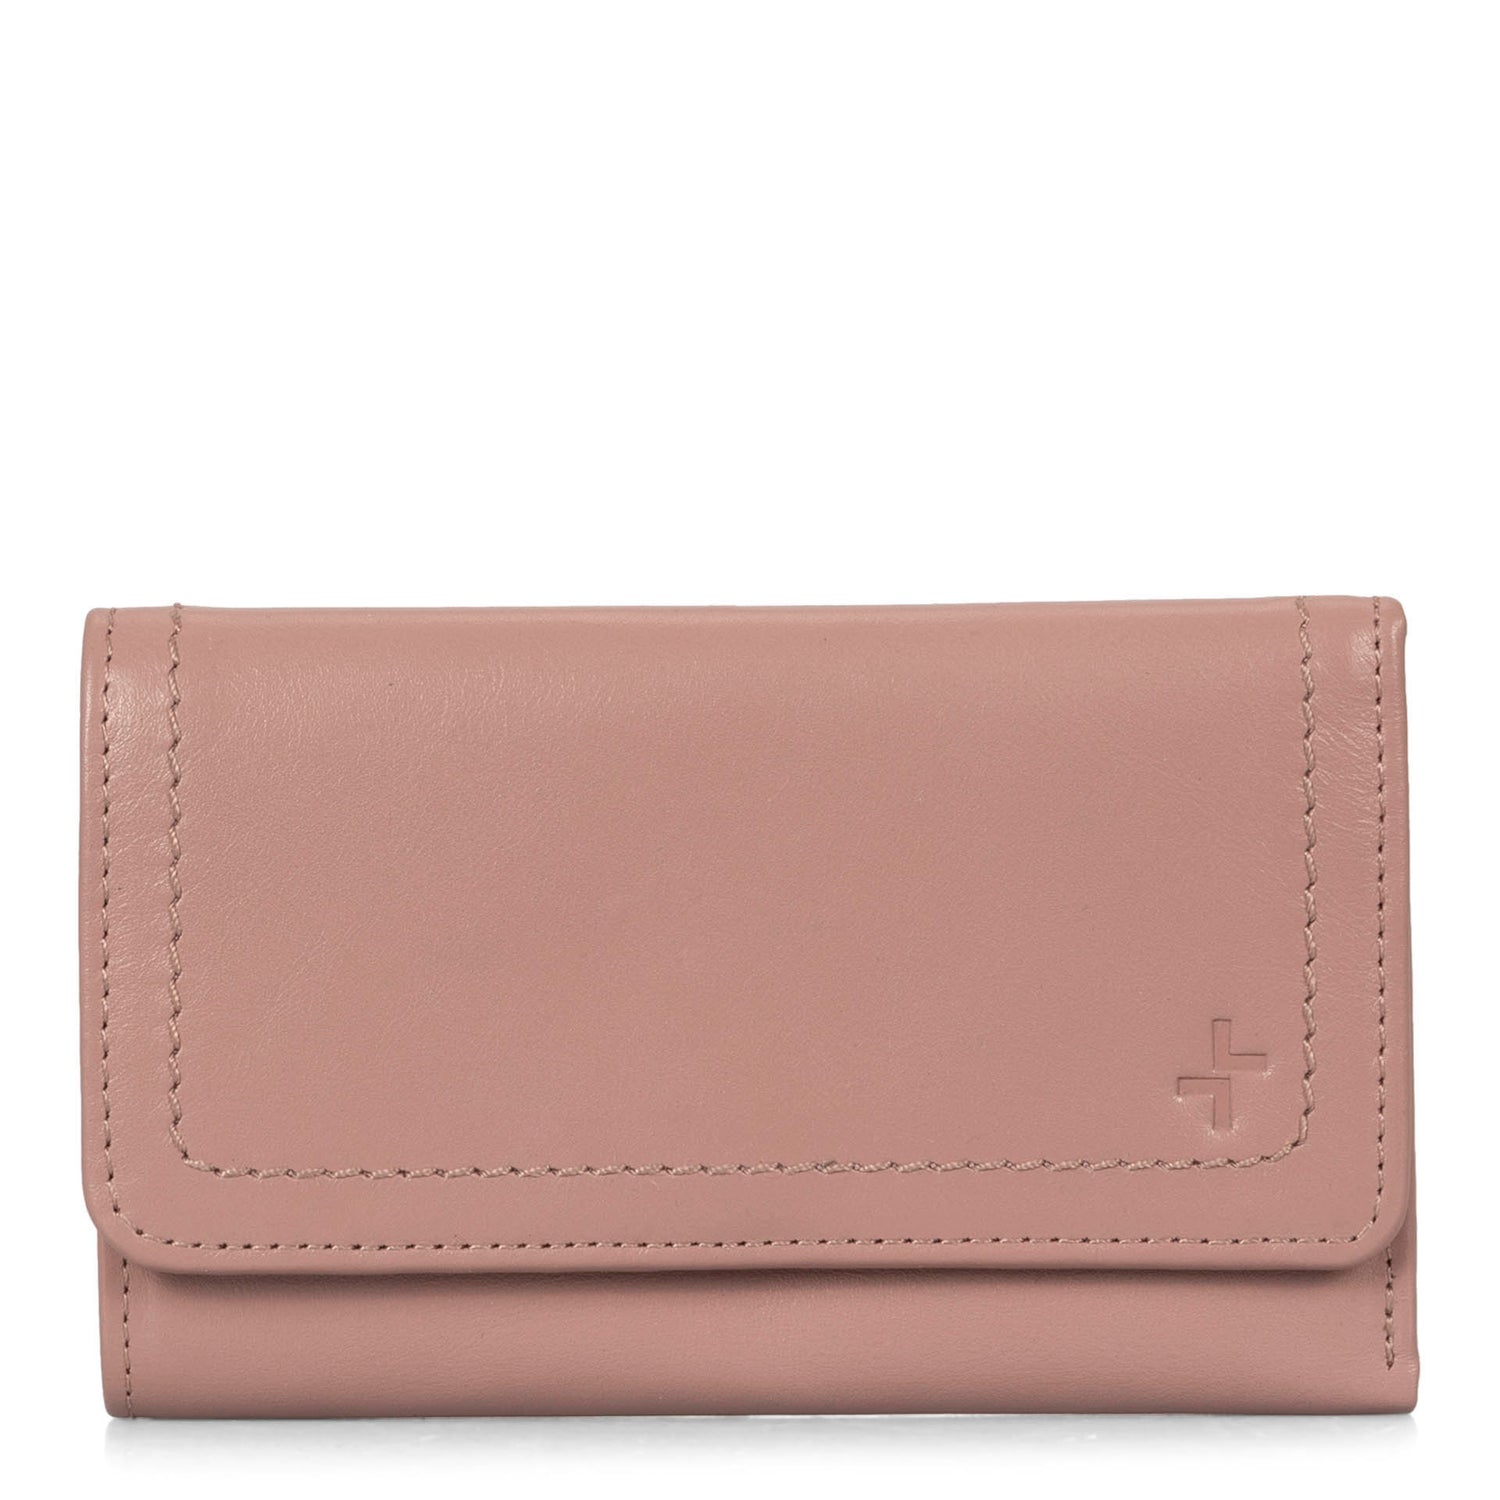 Front side of a taupe flap wallet for women called Kara designed by Tracker showing its logo and soft leather.